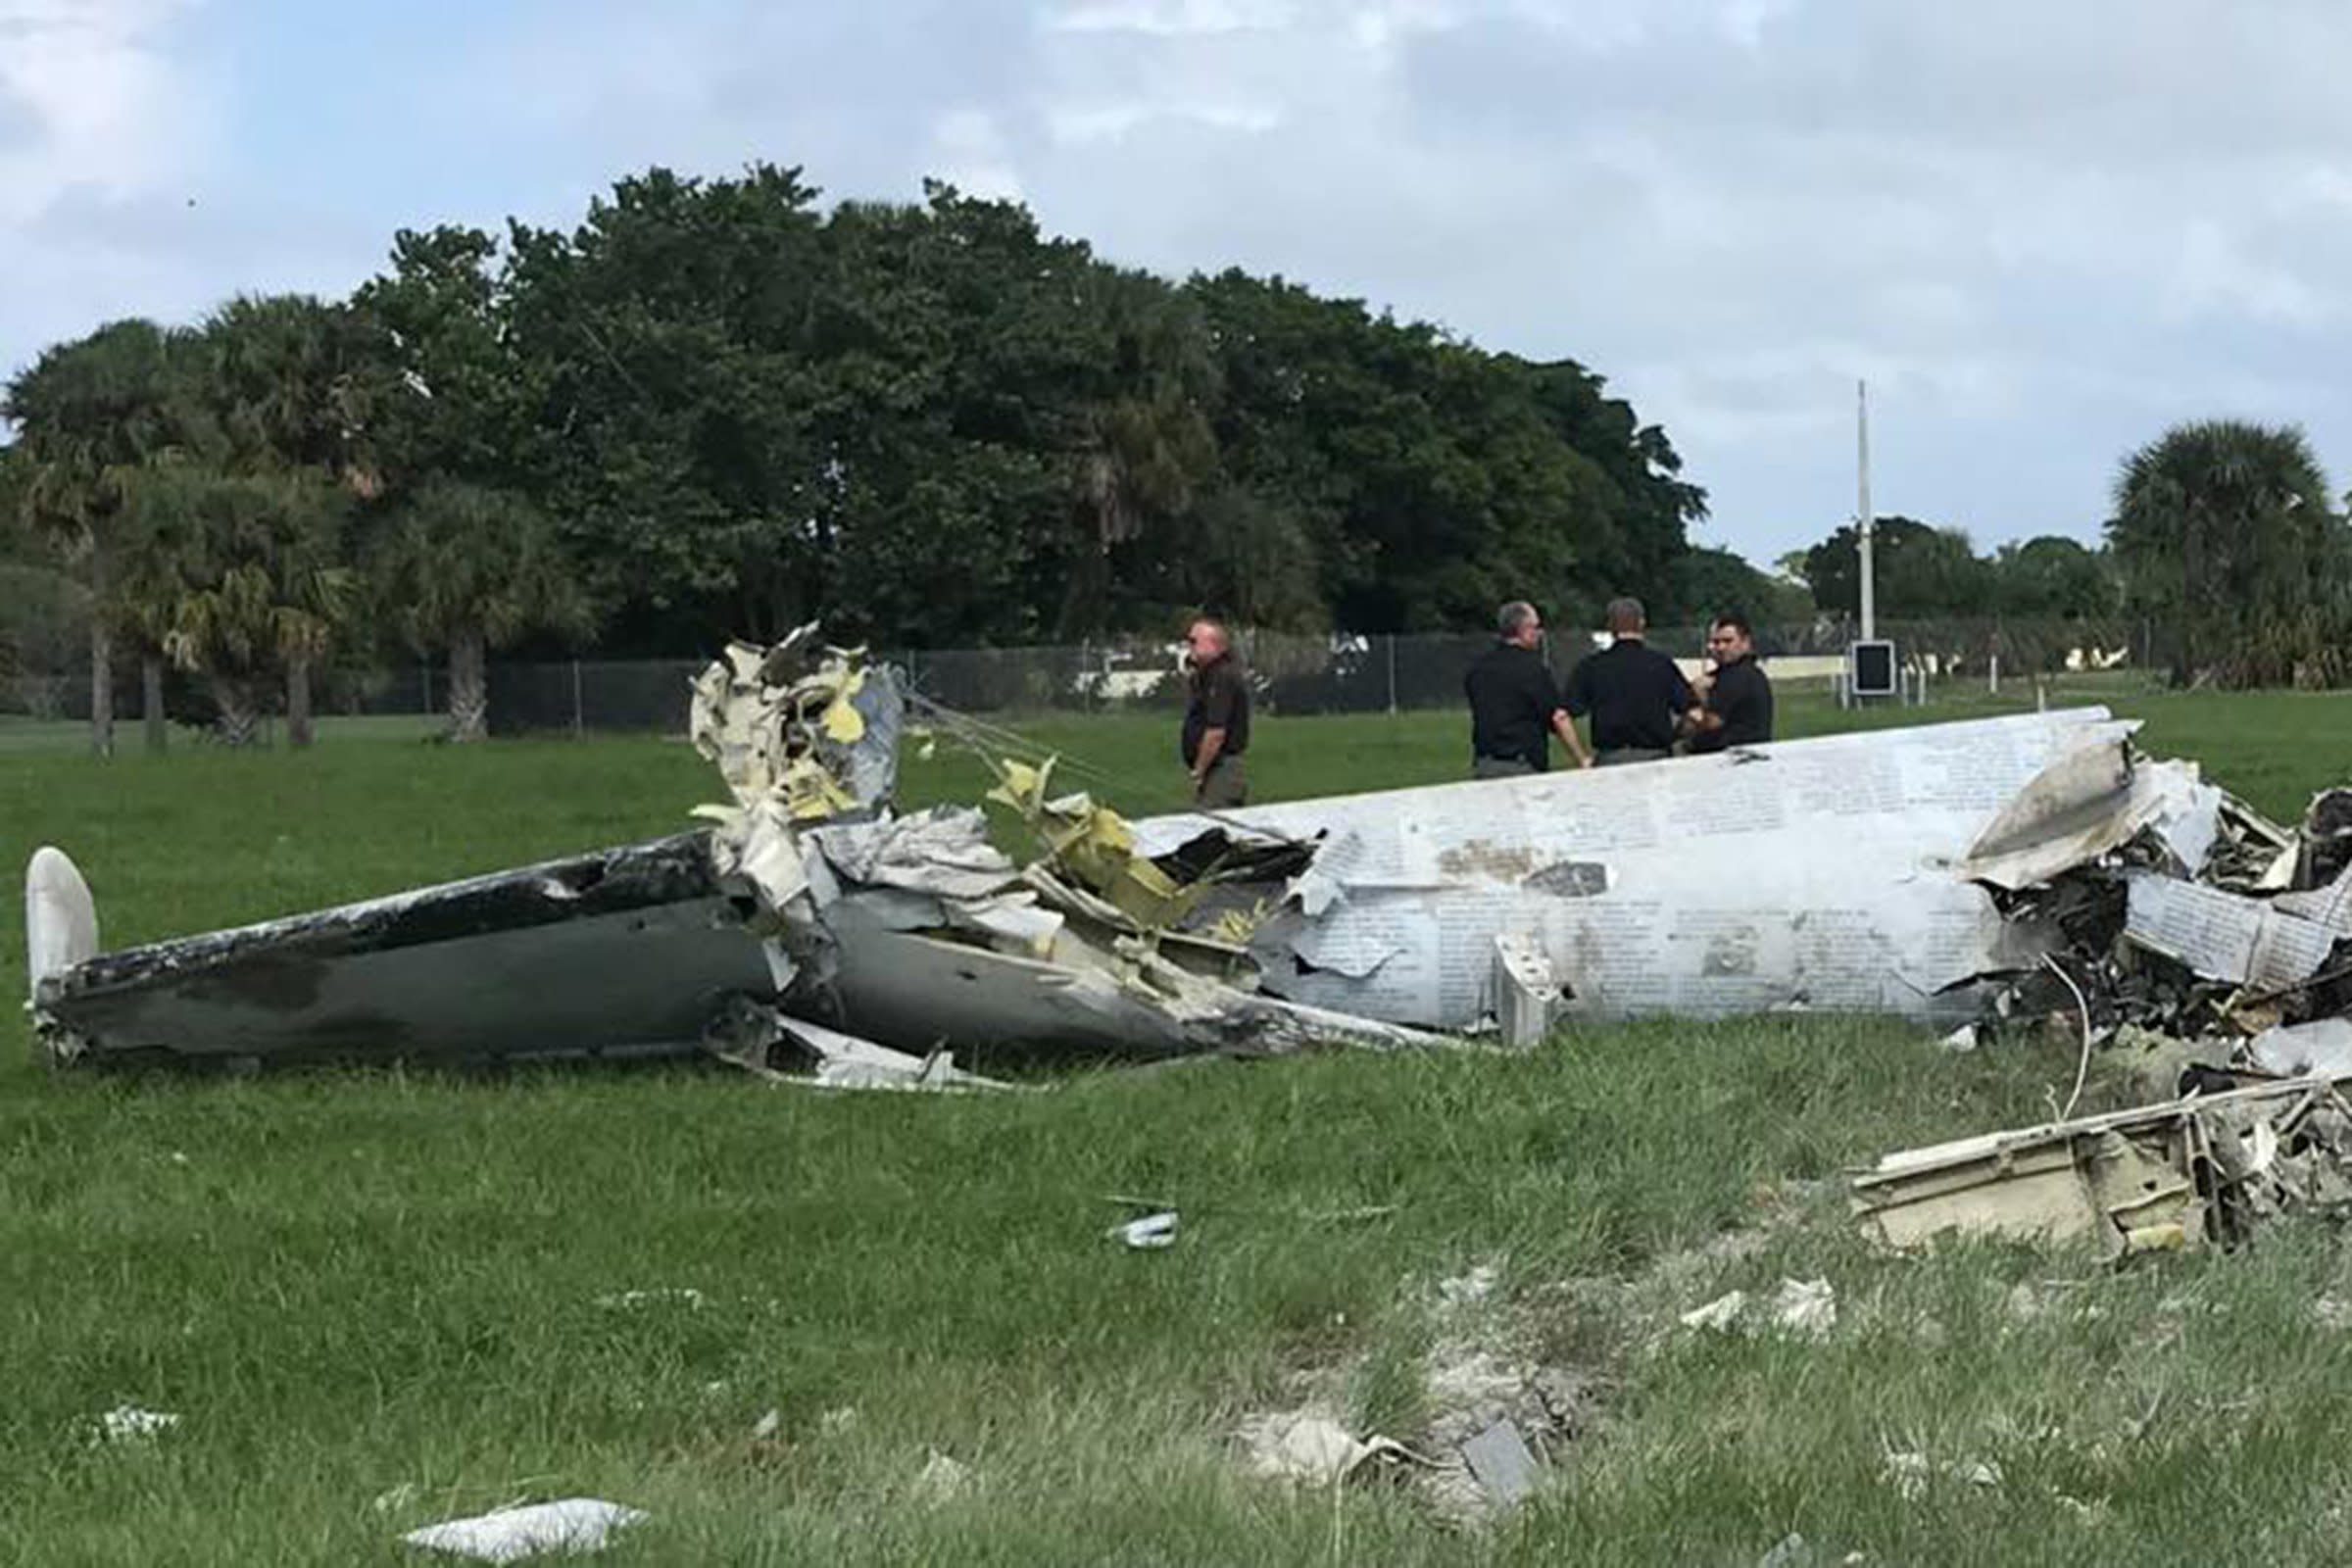 Pilot Dies After Plane Crashes at Florida Air Show 'There's Nothing